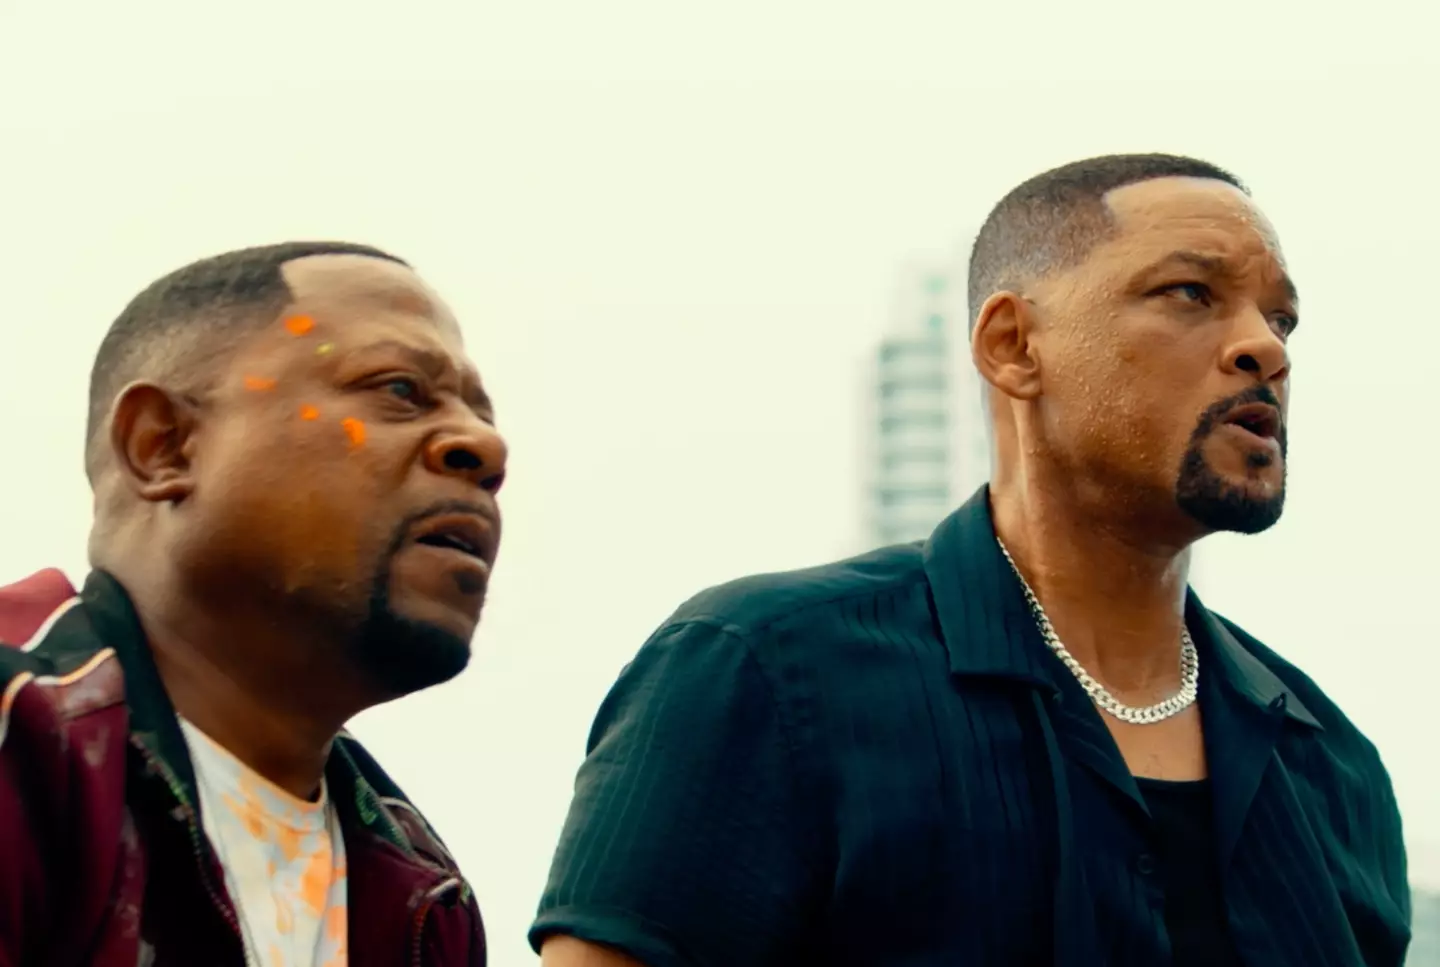 Martin Lawrence and Will Smith are back in action.